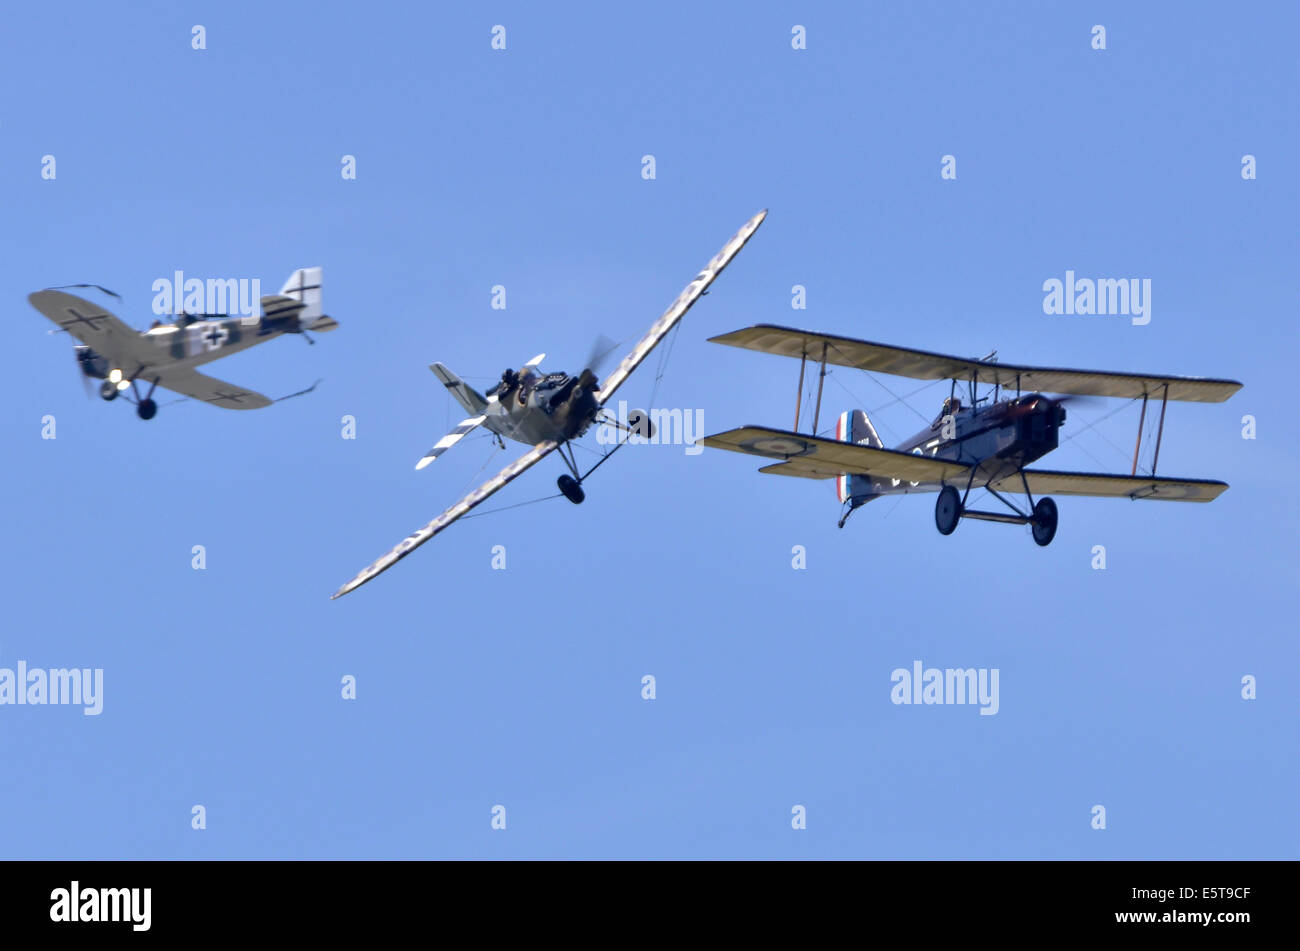 WW1 plane dogfight simulation between British SE5.a and two German Junkers CL.1 aircraft at Farnborough Airshow Stock Photo